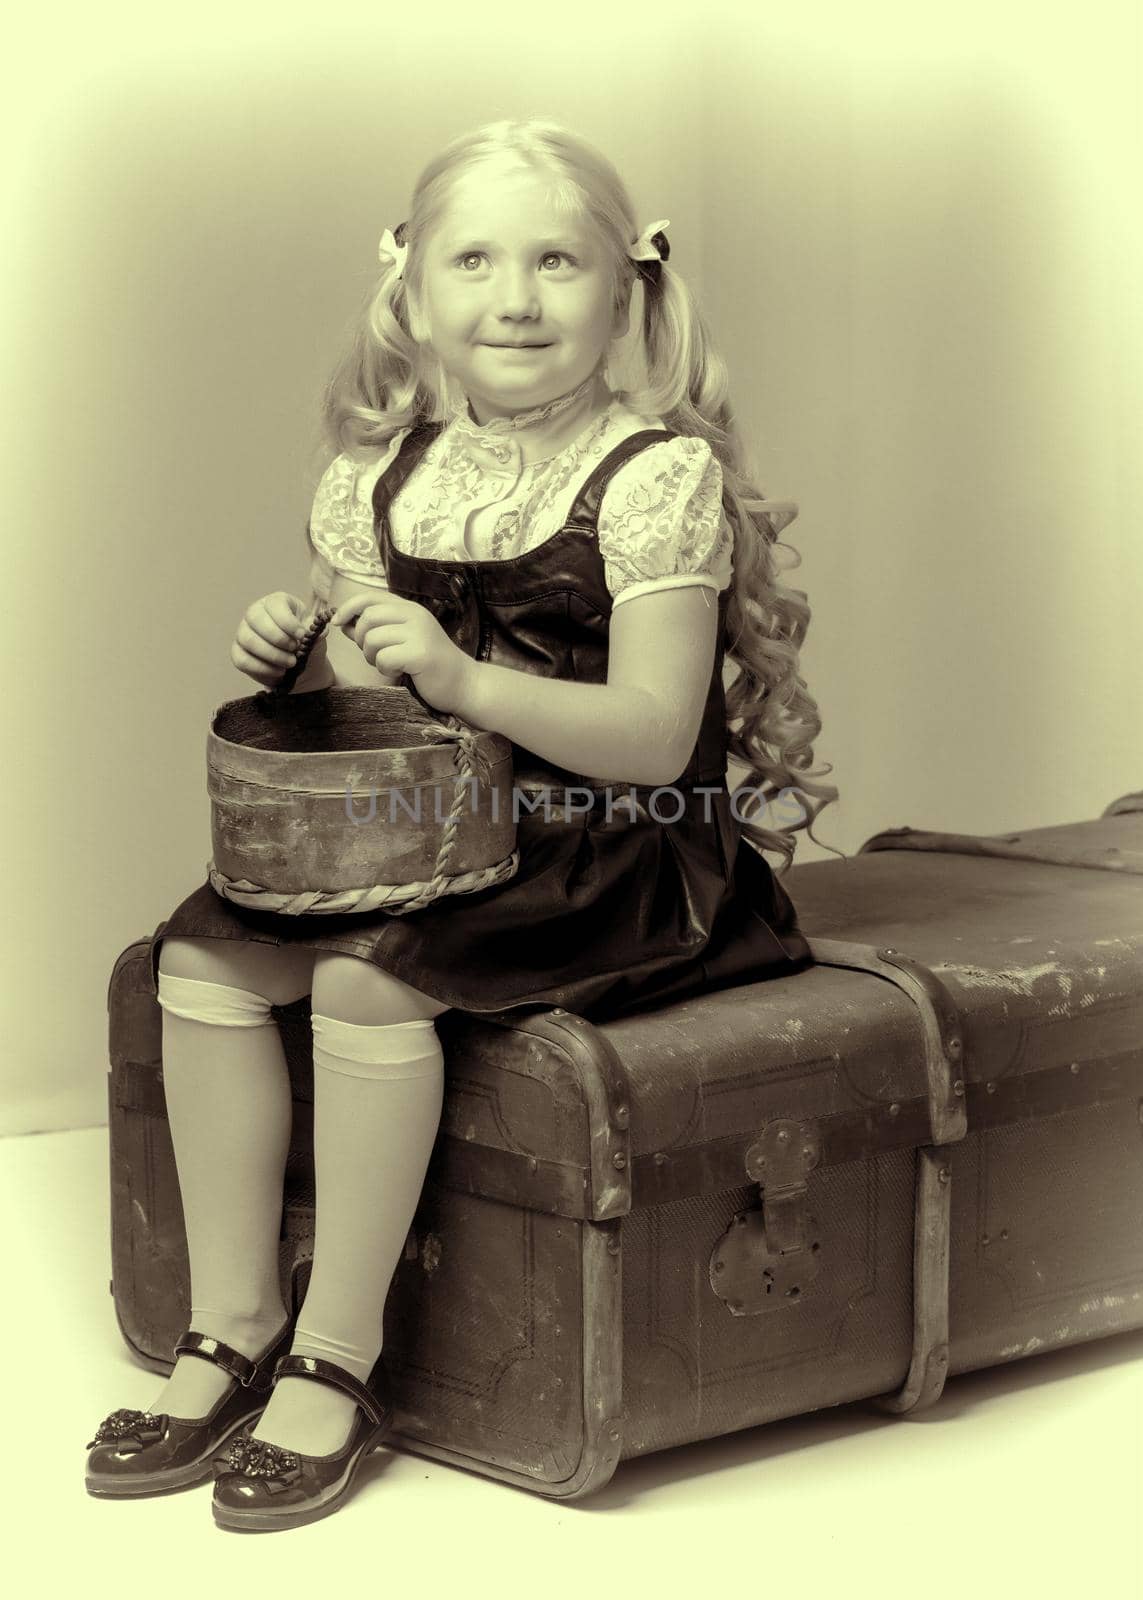 A little girl is sitting on an old suitcase with a basket. by kolesnikov_studio